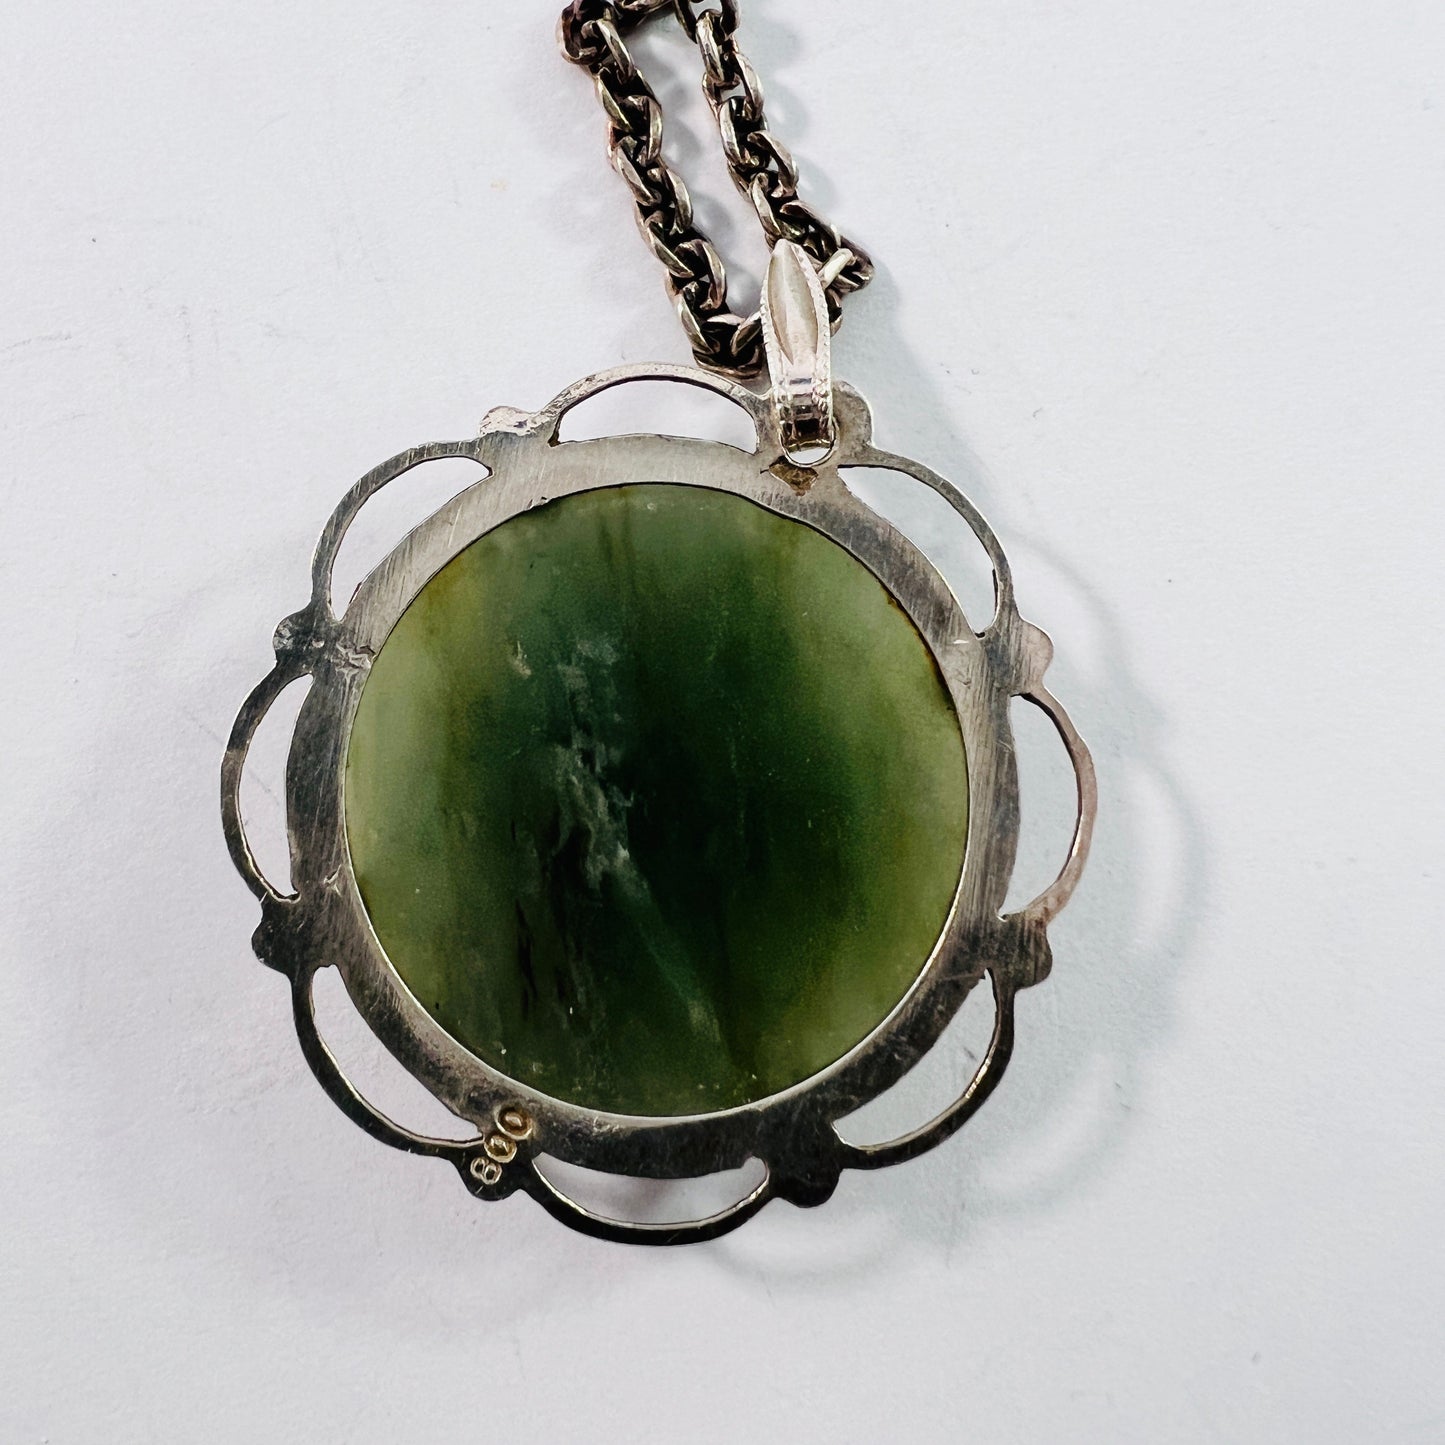 Vintage Mid Century 800 Silver Green Hardstone Pendant Long Chain Necklace.